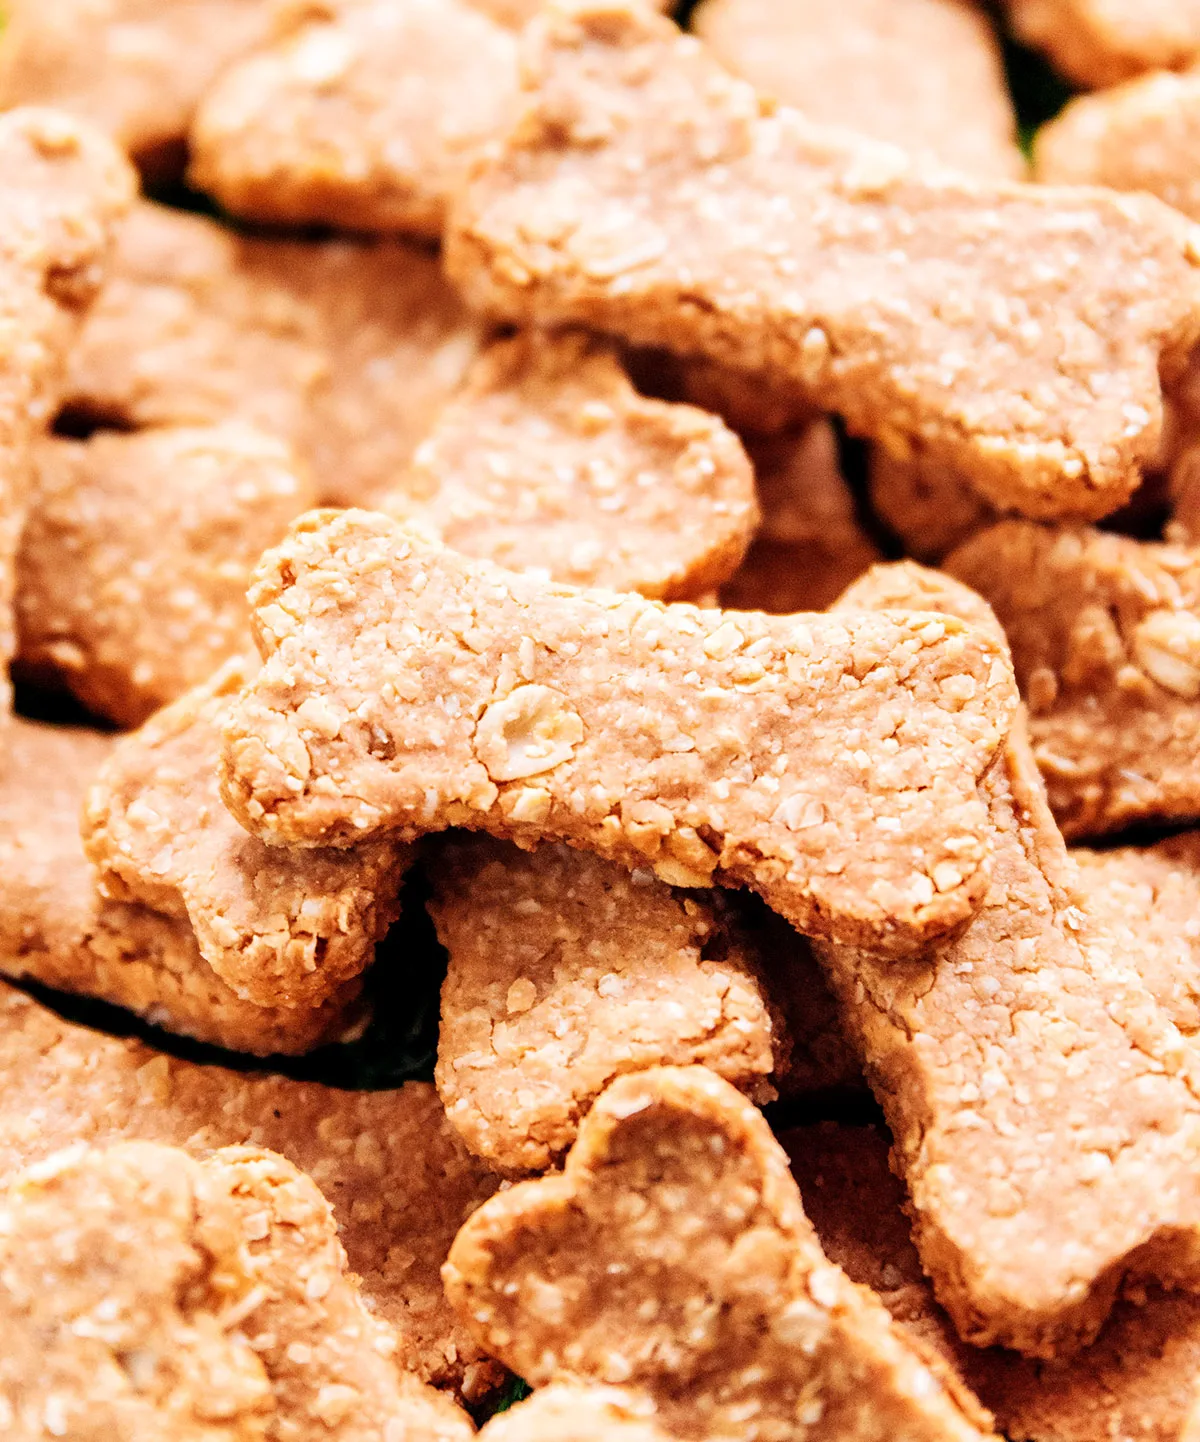 Close up of dog biscuit in a pile of biscuits.